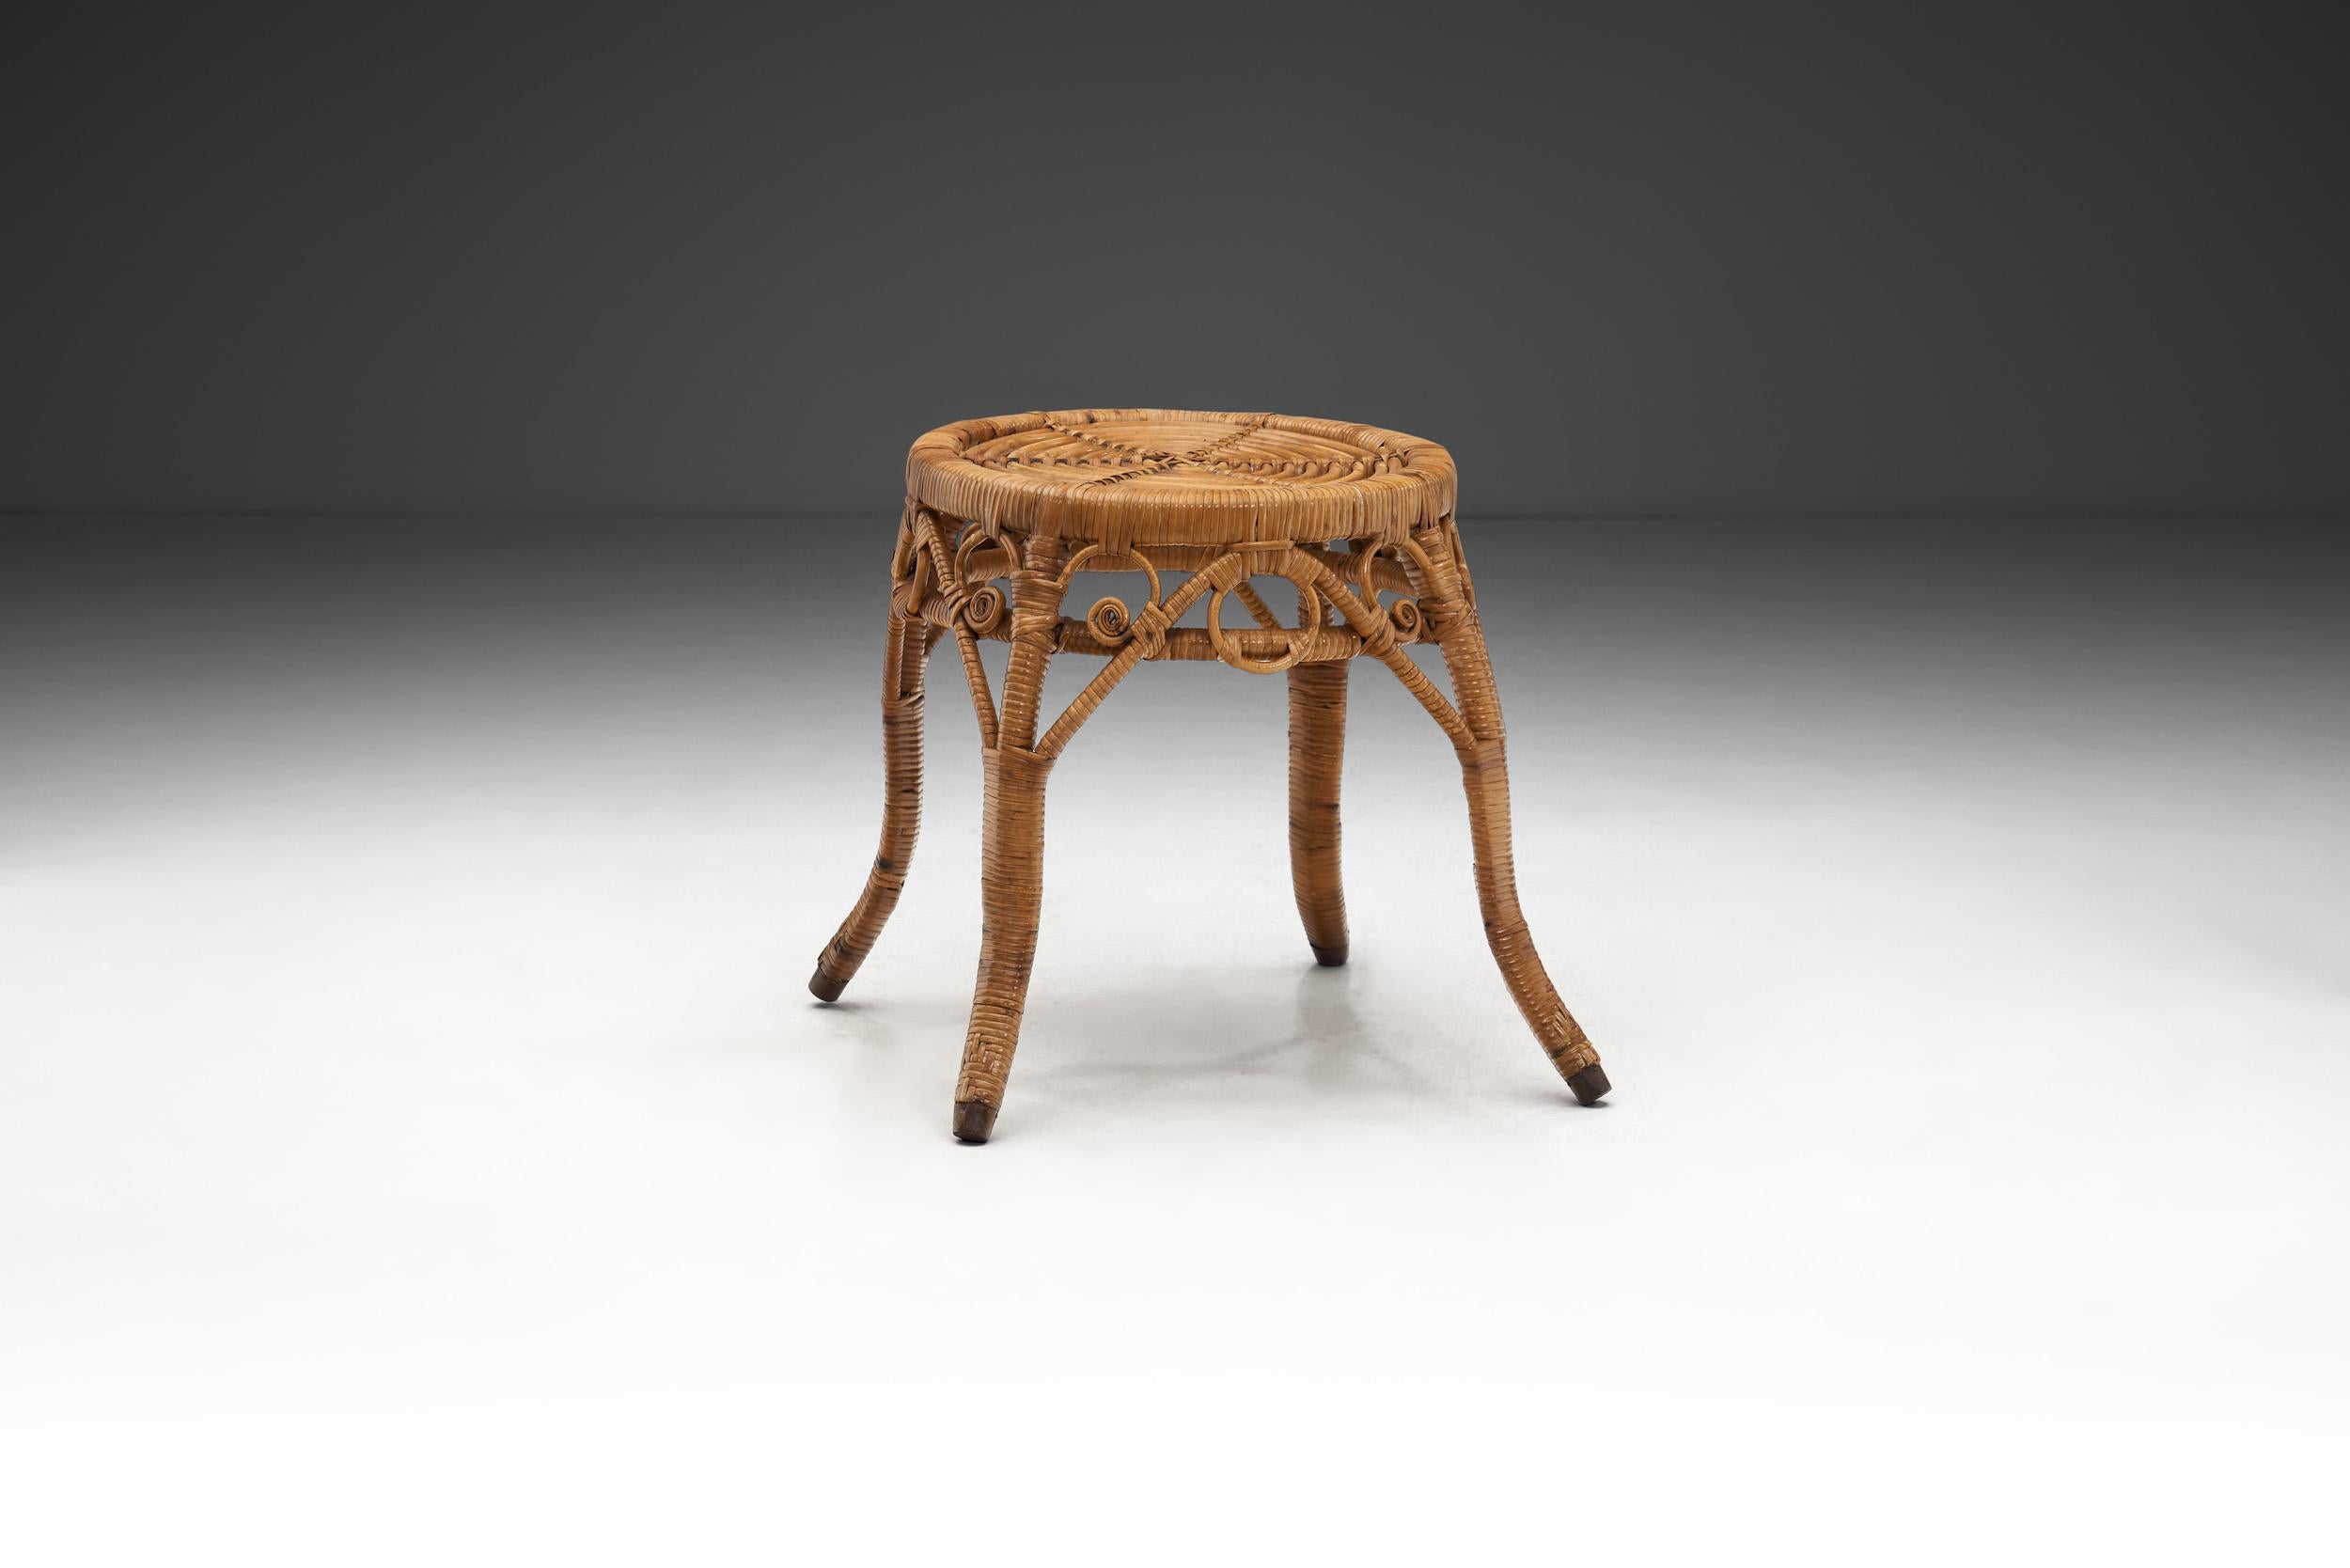 European Woven Rattan Stool, Europe Early 20th Century For Sale